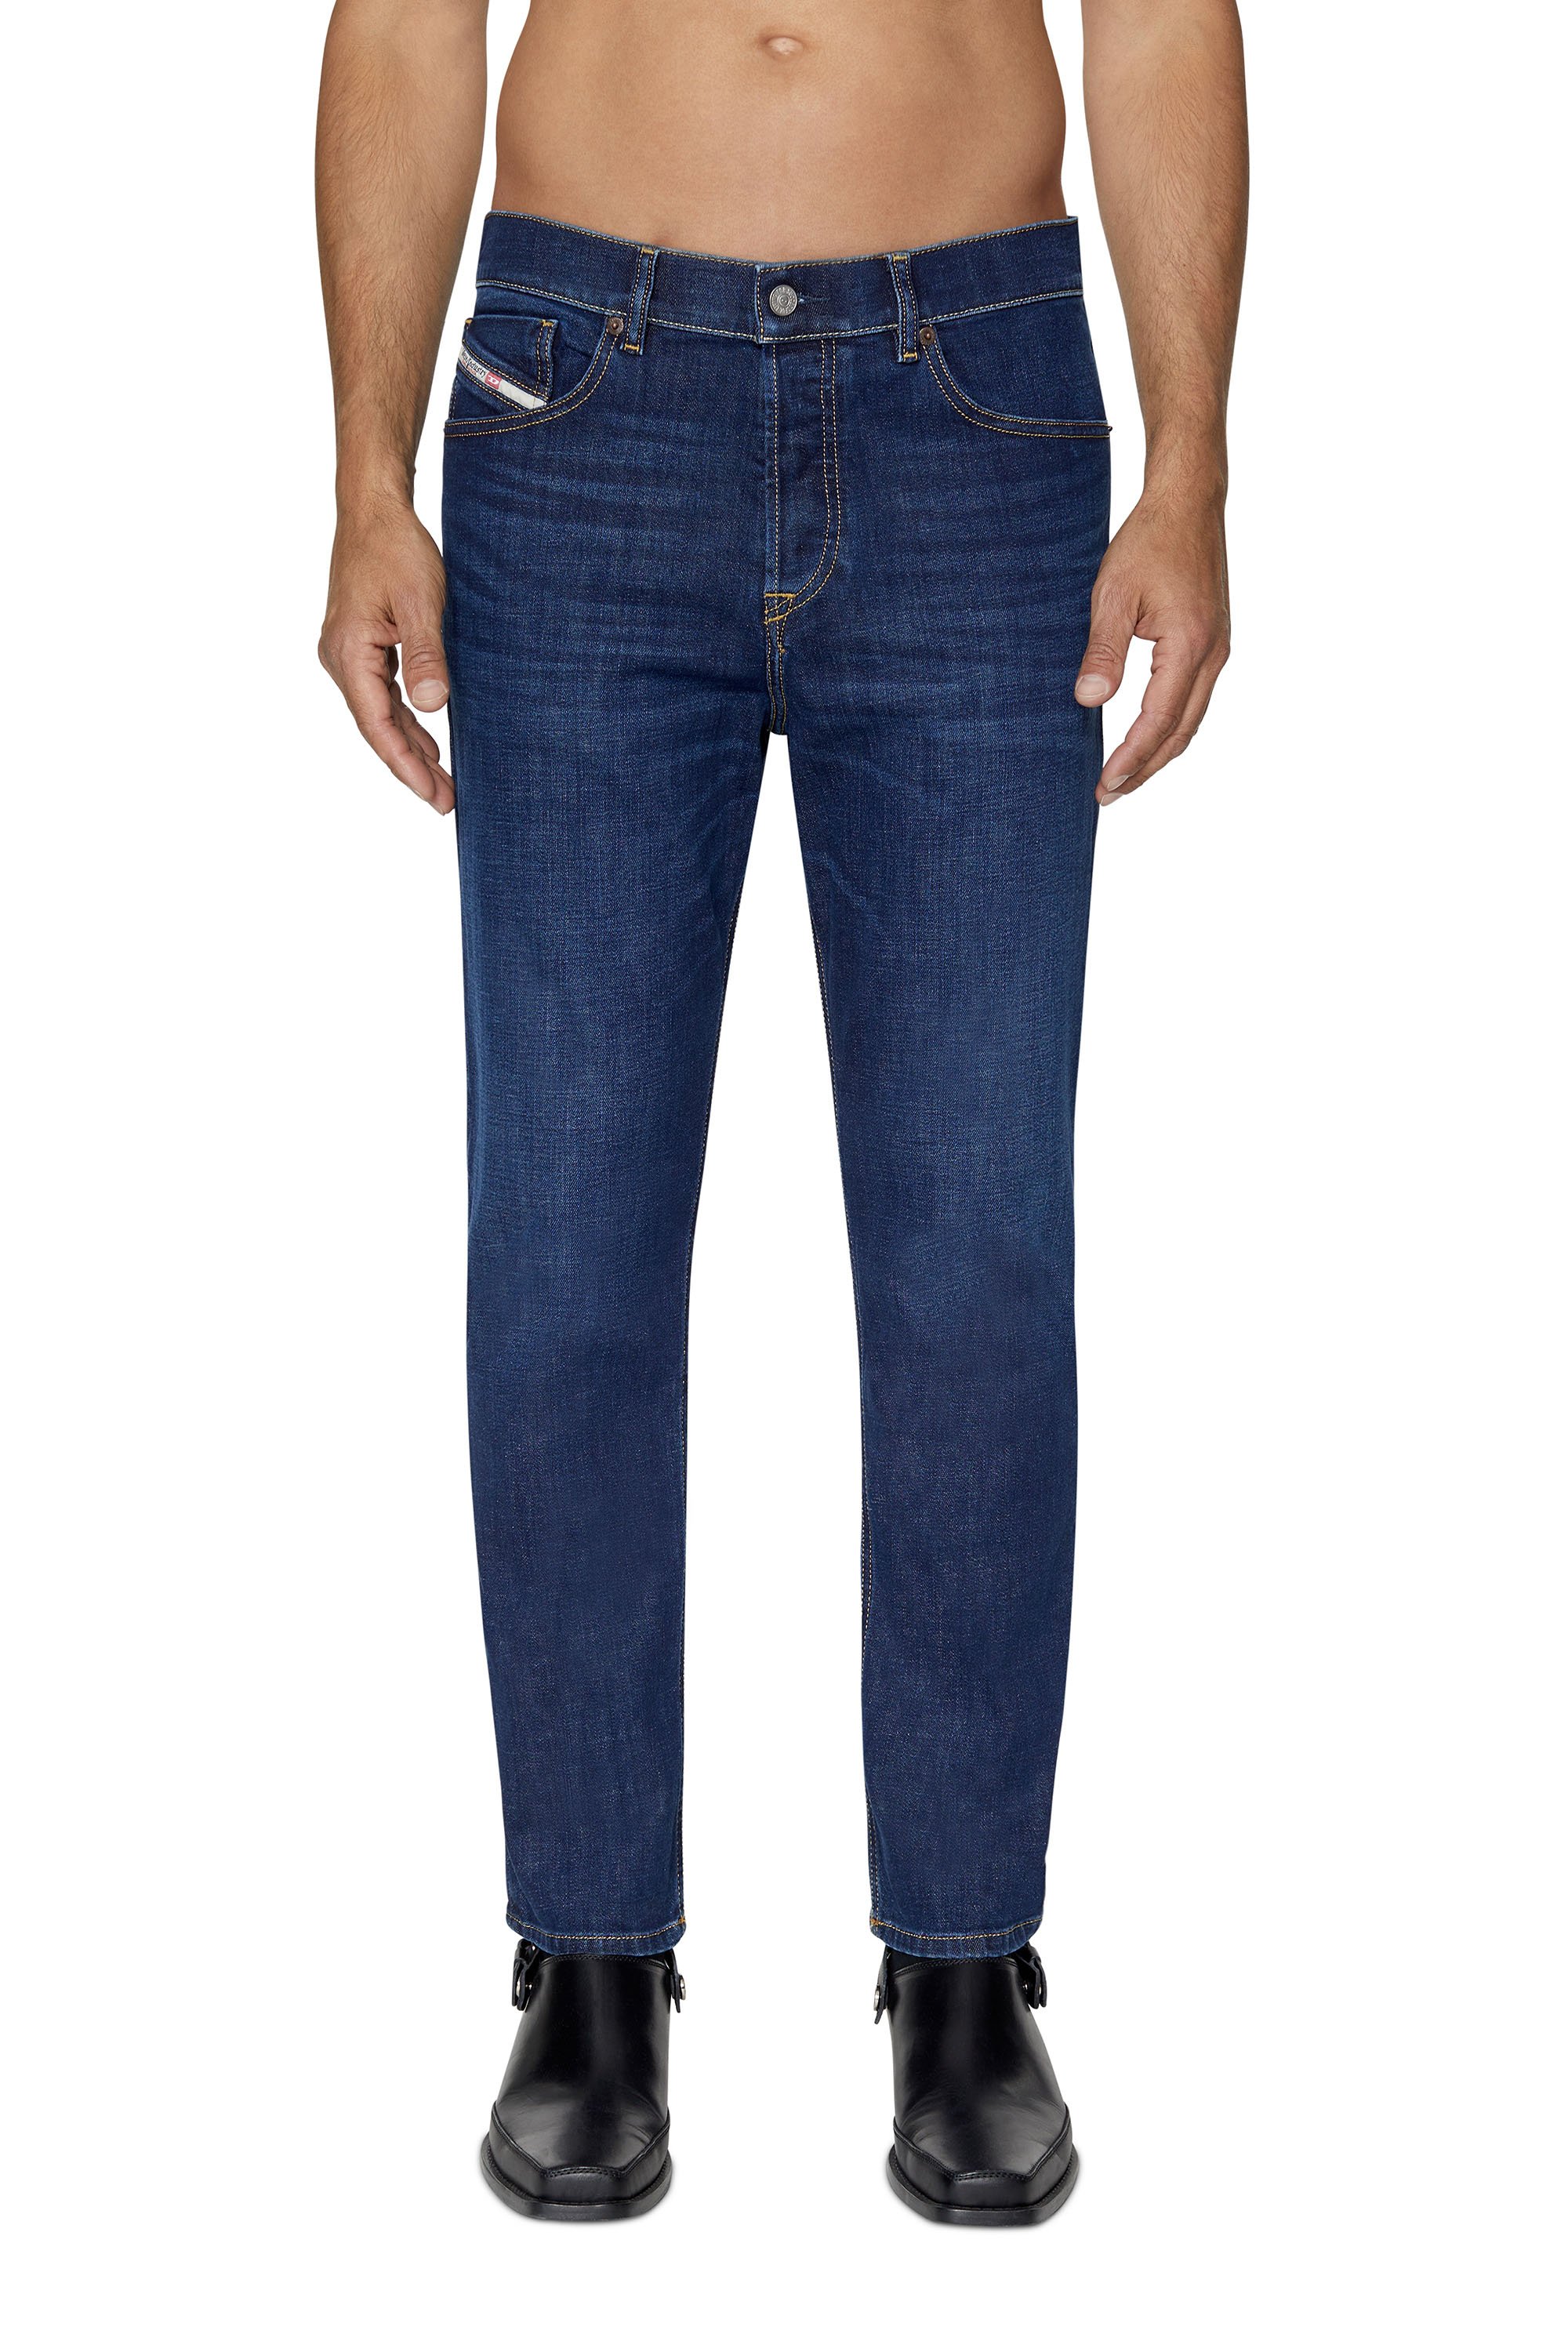 Diesel - Tapered Jeans - 2005 D-Fining - Vaqueros - Hombre - Azul marino